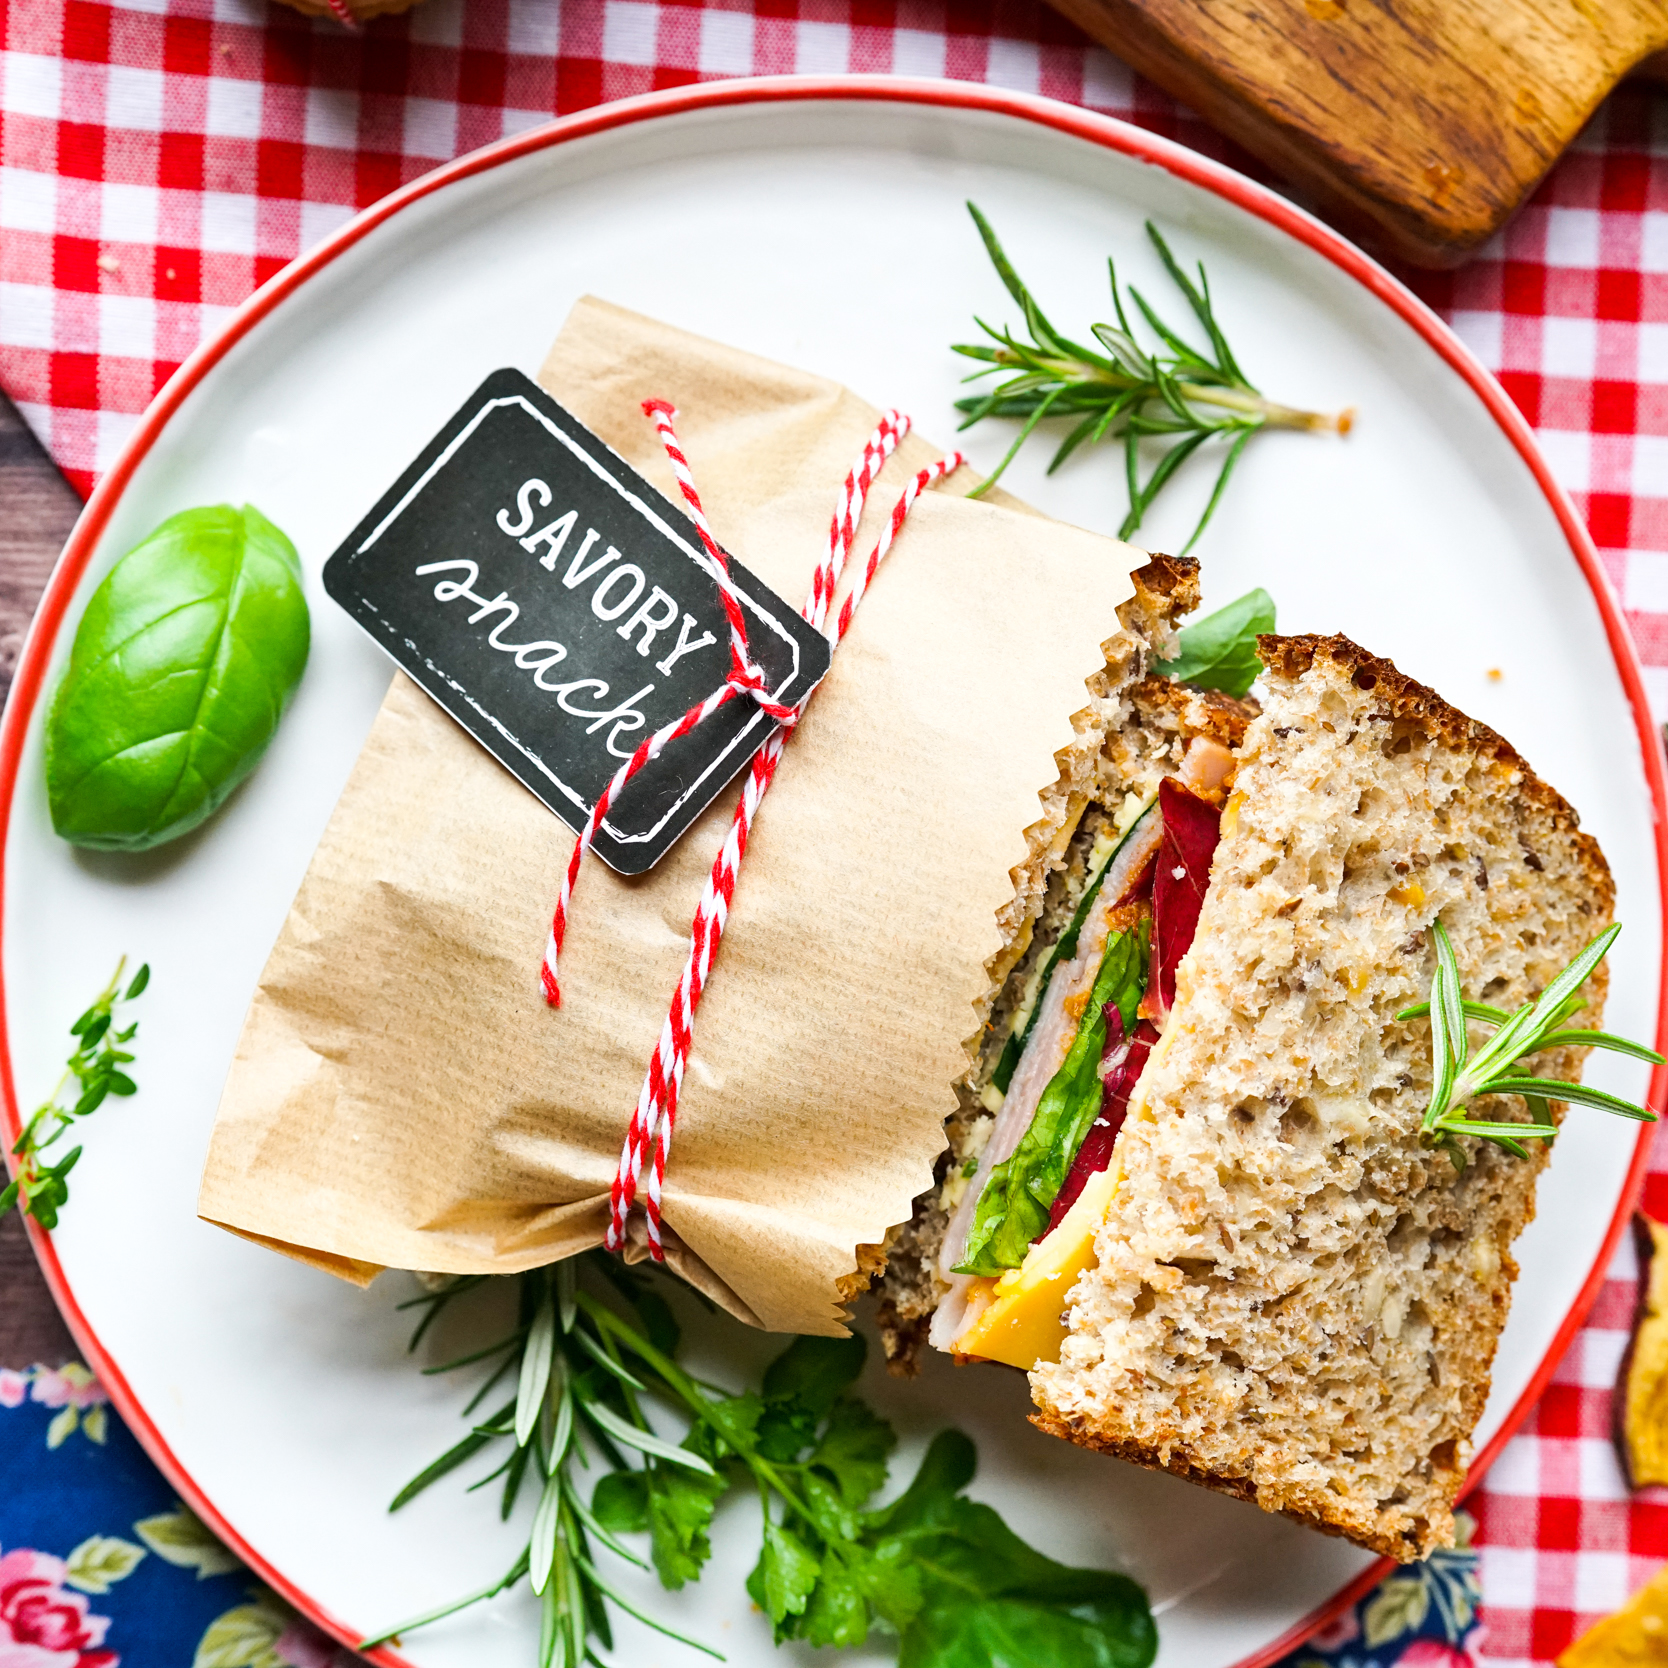 Create a perfect picnic with chalkboard food labels and red and white check details